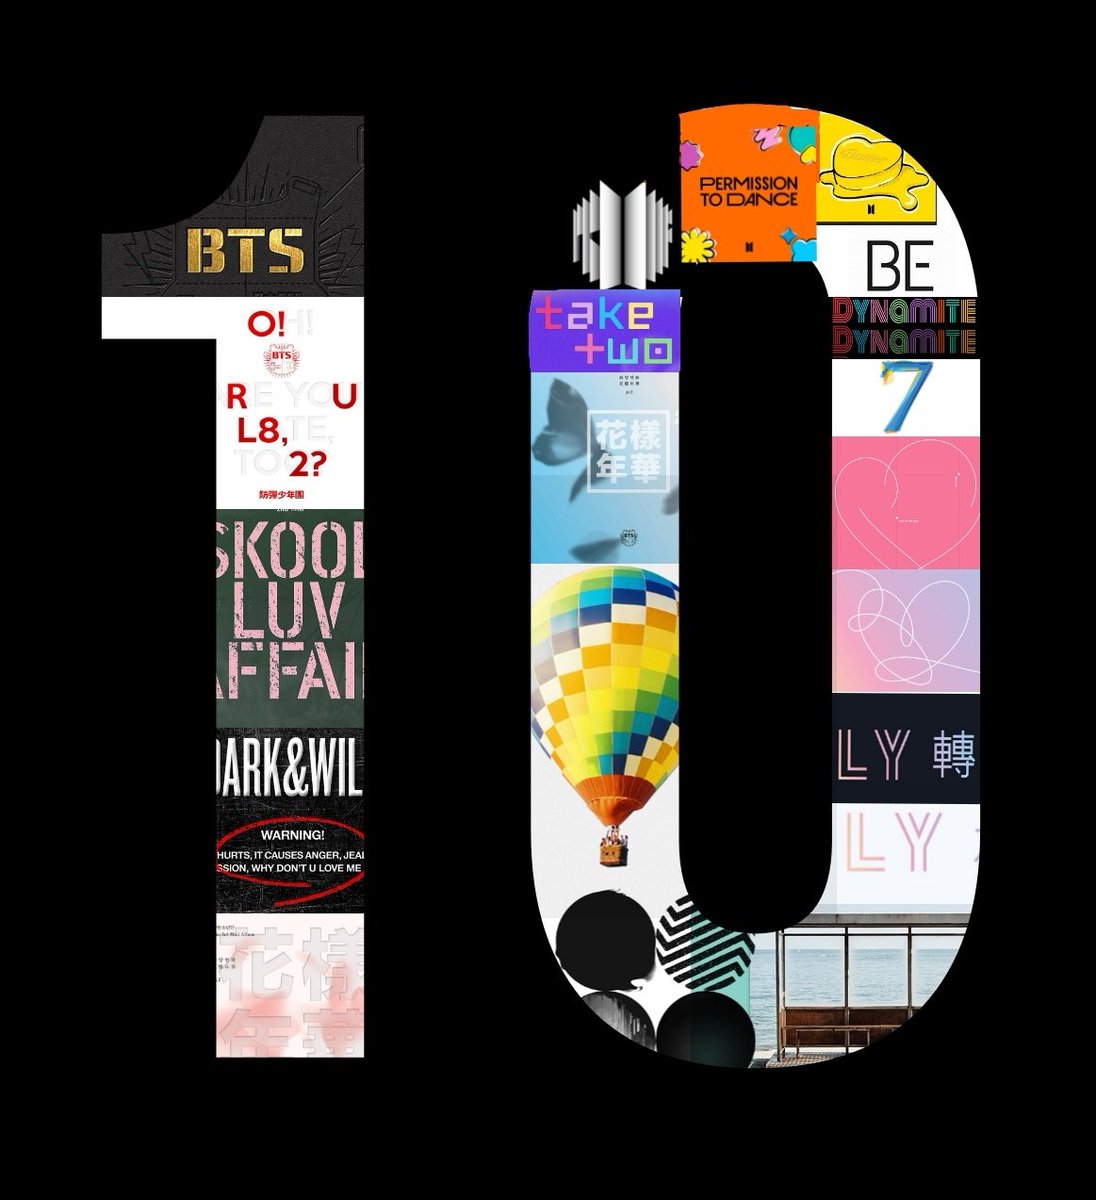 BTS discography is a perfect 10. *Albums list from BigHit site* #10yearswithBTS #BTS10thAnniversary #BTSFesta2023